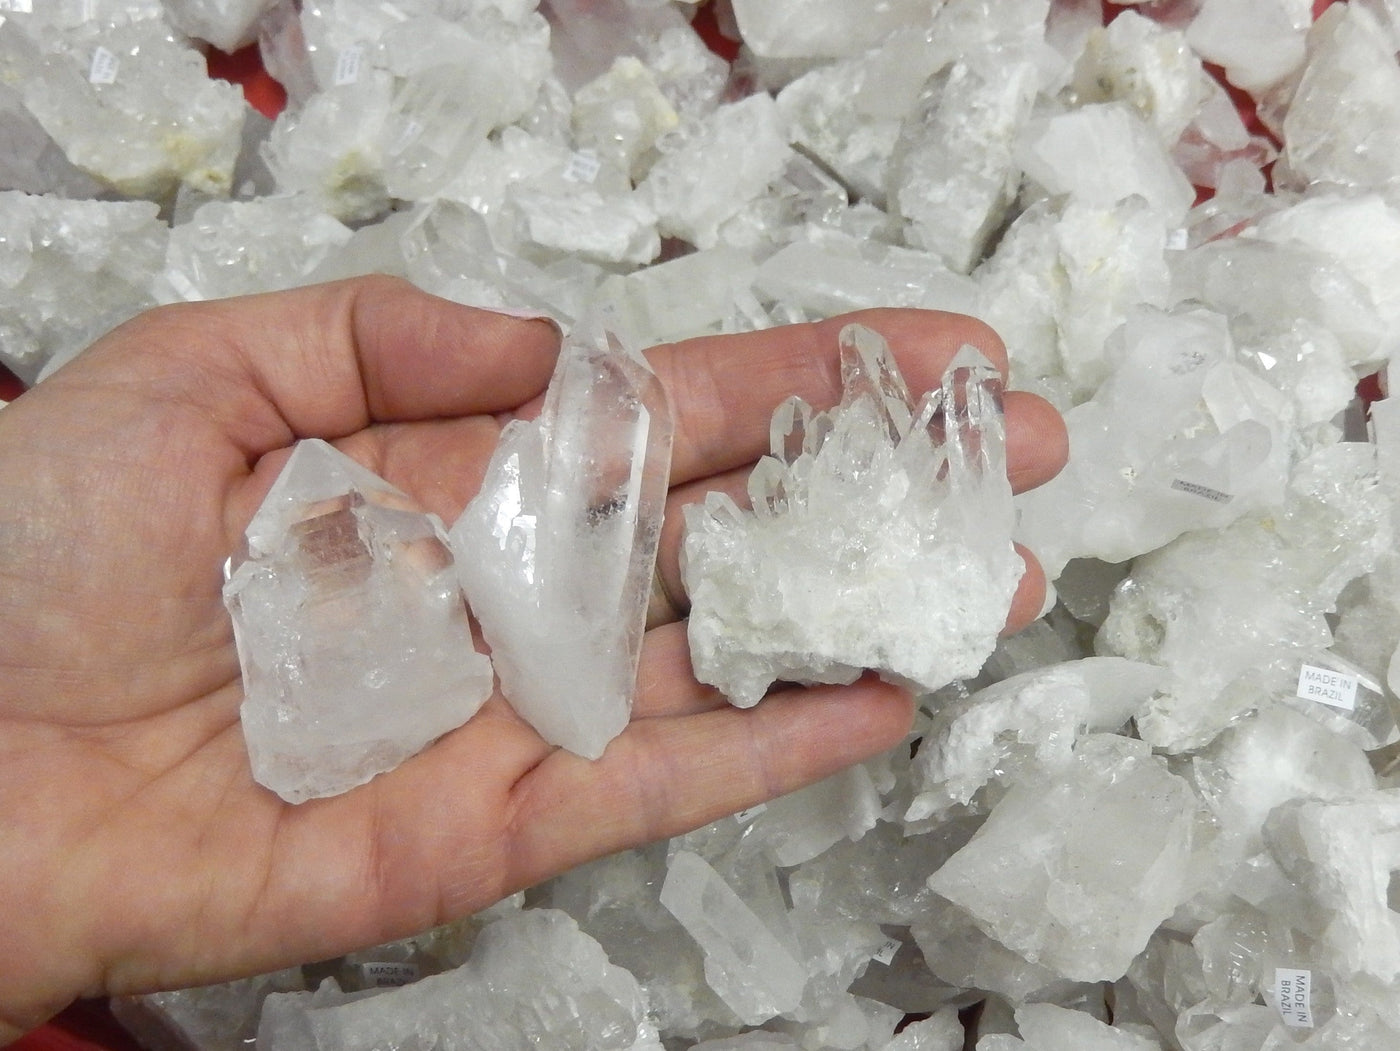 Crystal Cluster - Crystal Quartz Cluster - ONE (1) Gorgeous Clear Crystal Quartz Point - 3 in a hand